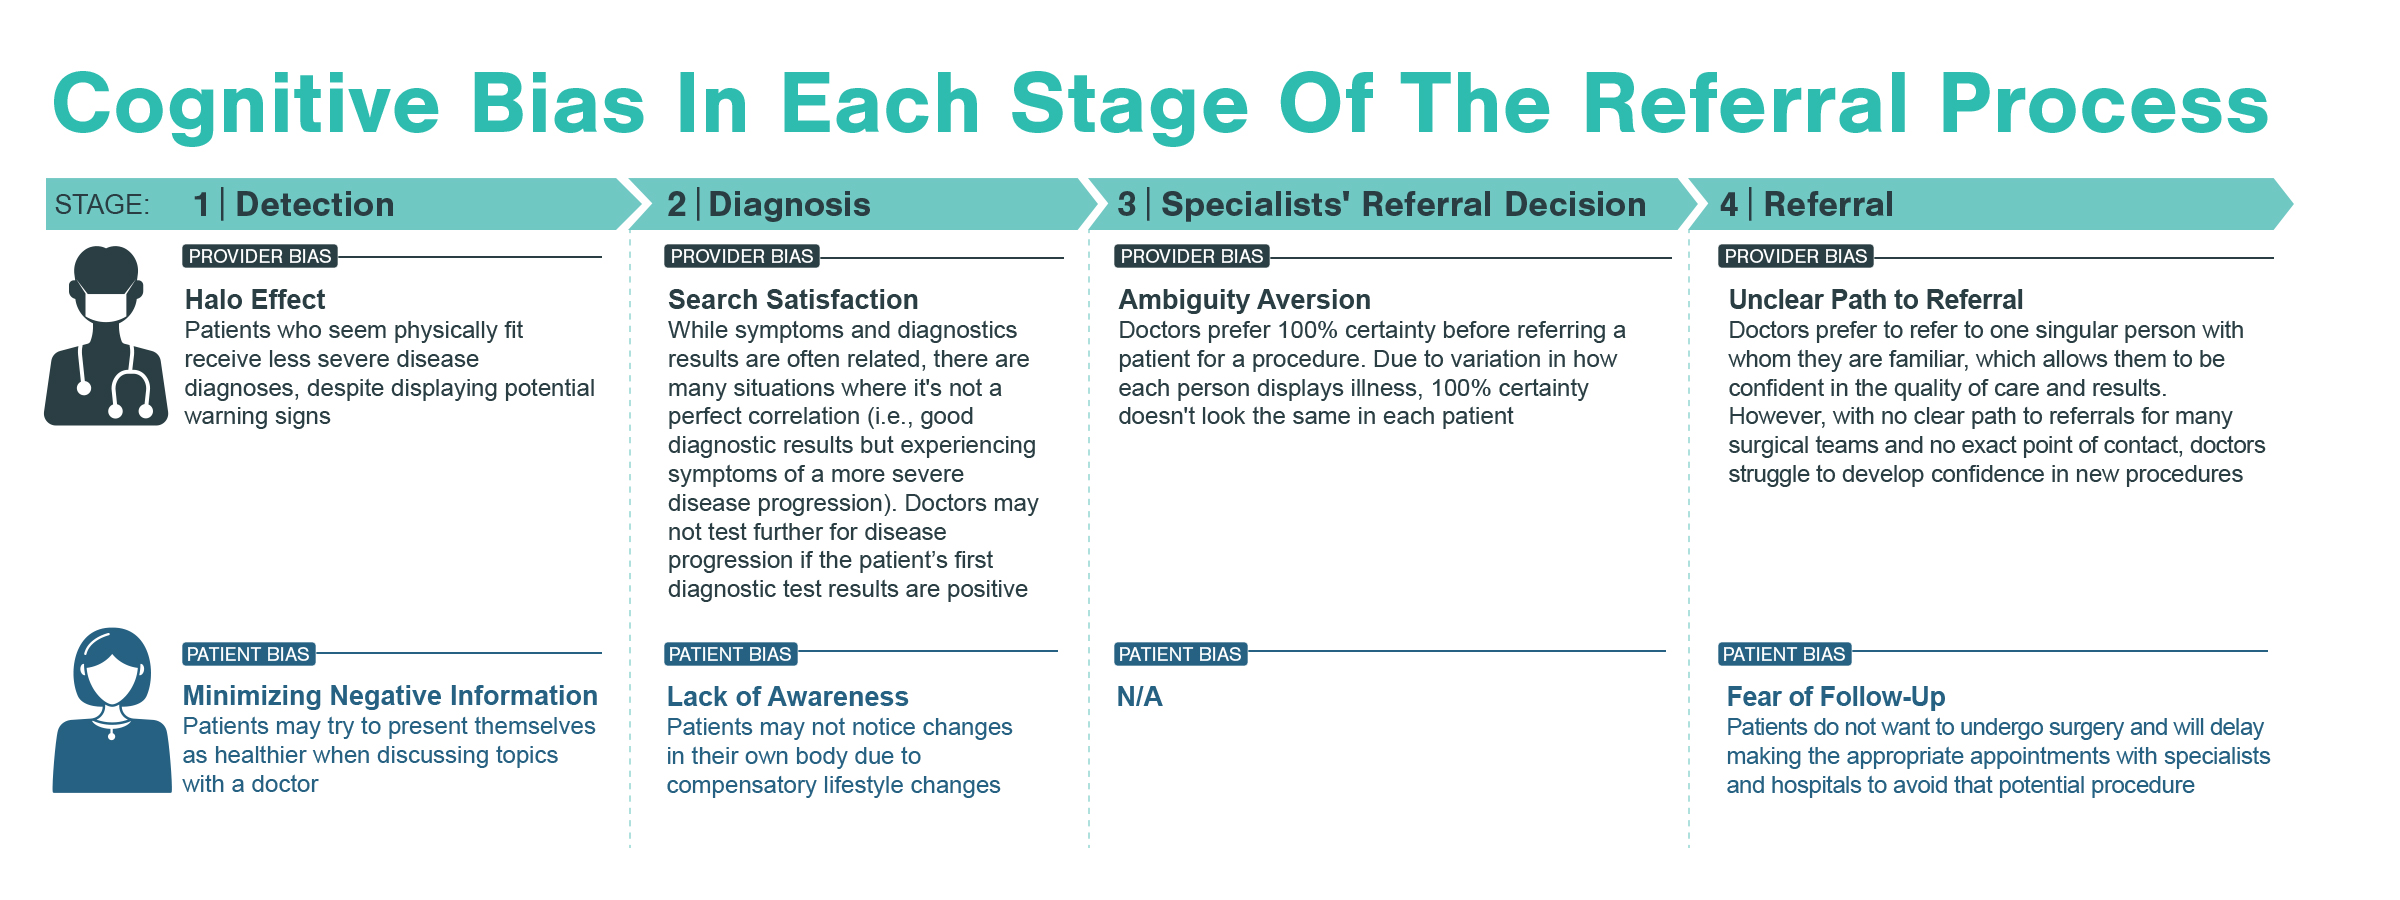 Cognitive bias map of specialist referral pathway